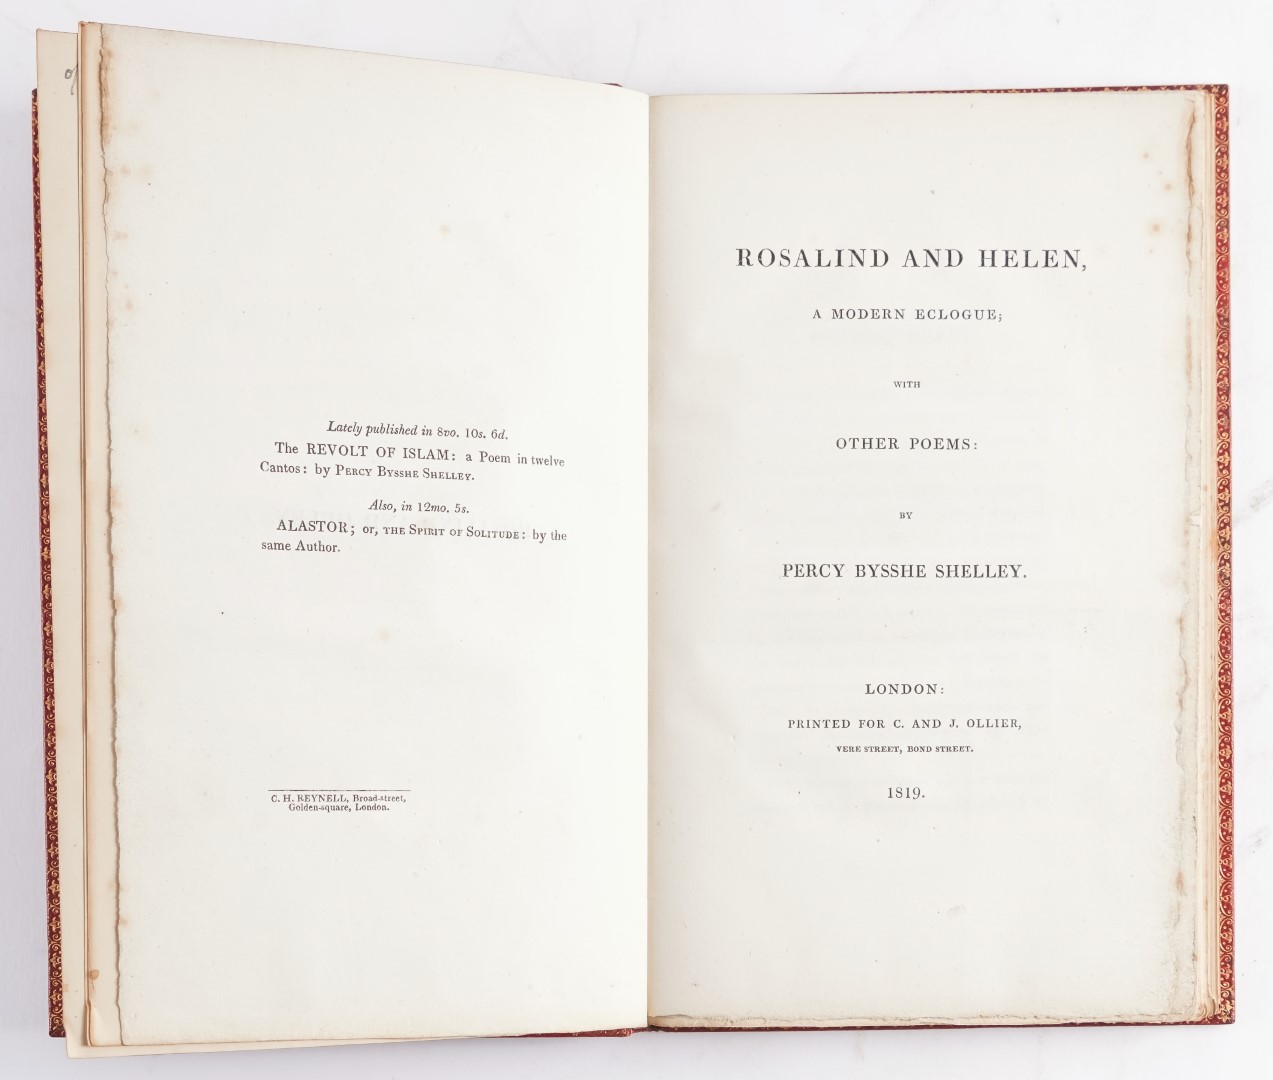 SHELLEY, Percy Bysshe (1792-1822).  Rosalind and Helen, a Modern Eclogue; with Other Poems, London, 1819, large 8vo, FINELY BOUND in late 19th-century full red crushed morocco gilt. FIRST EDITION.